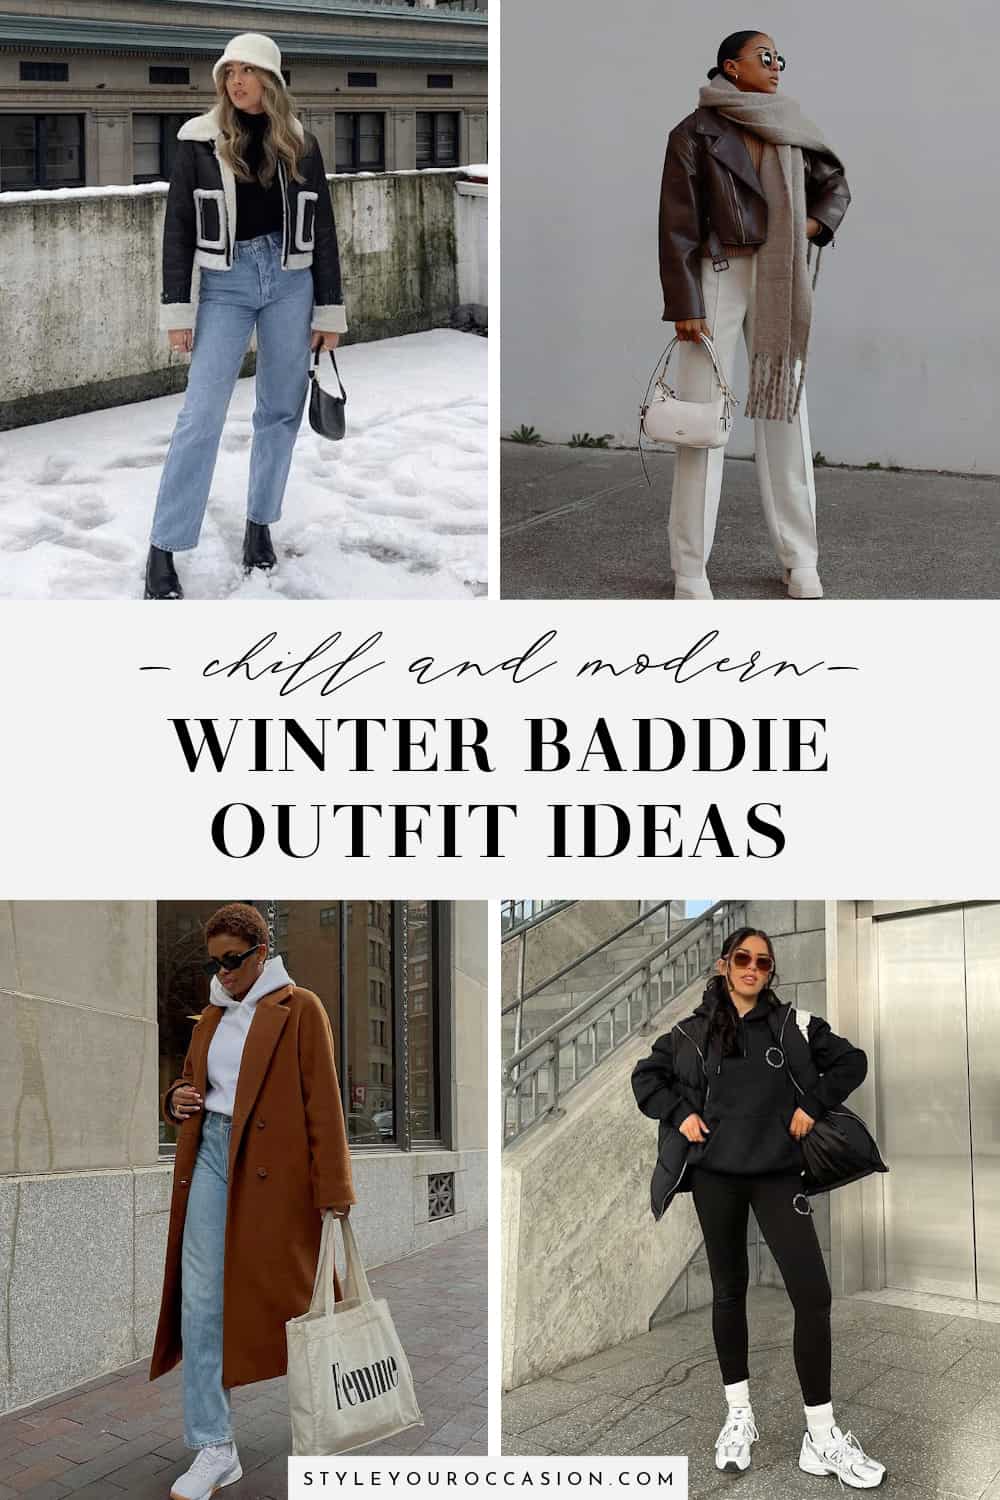 15+ Baddie Winter Outfits for Next-Level Aesthetic When It's Cold